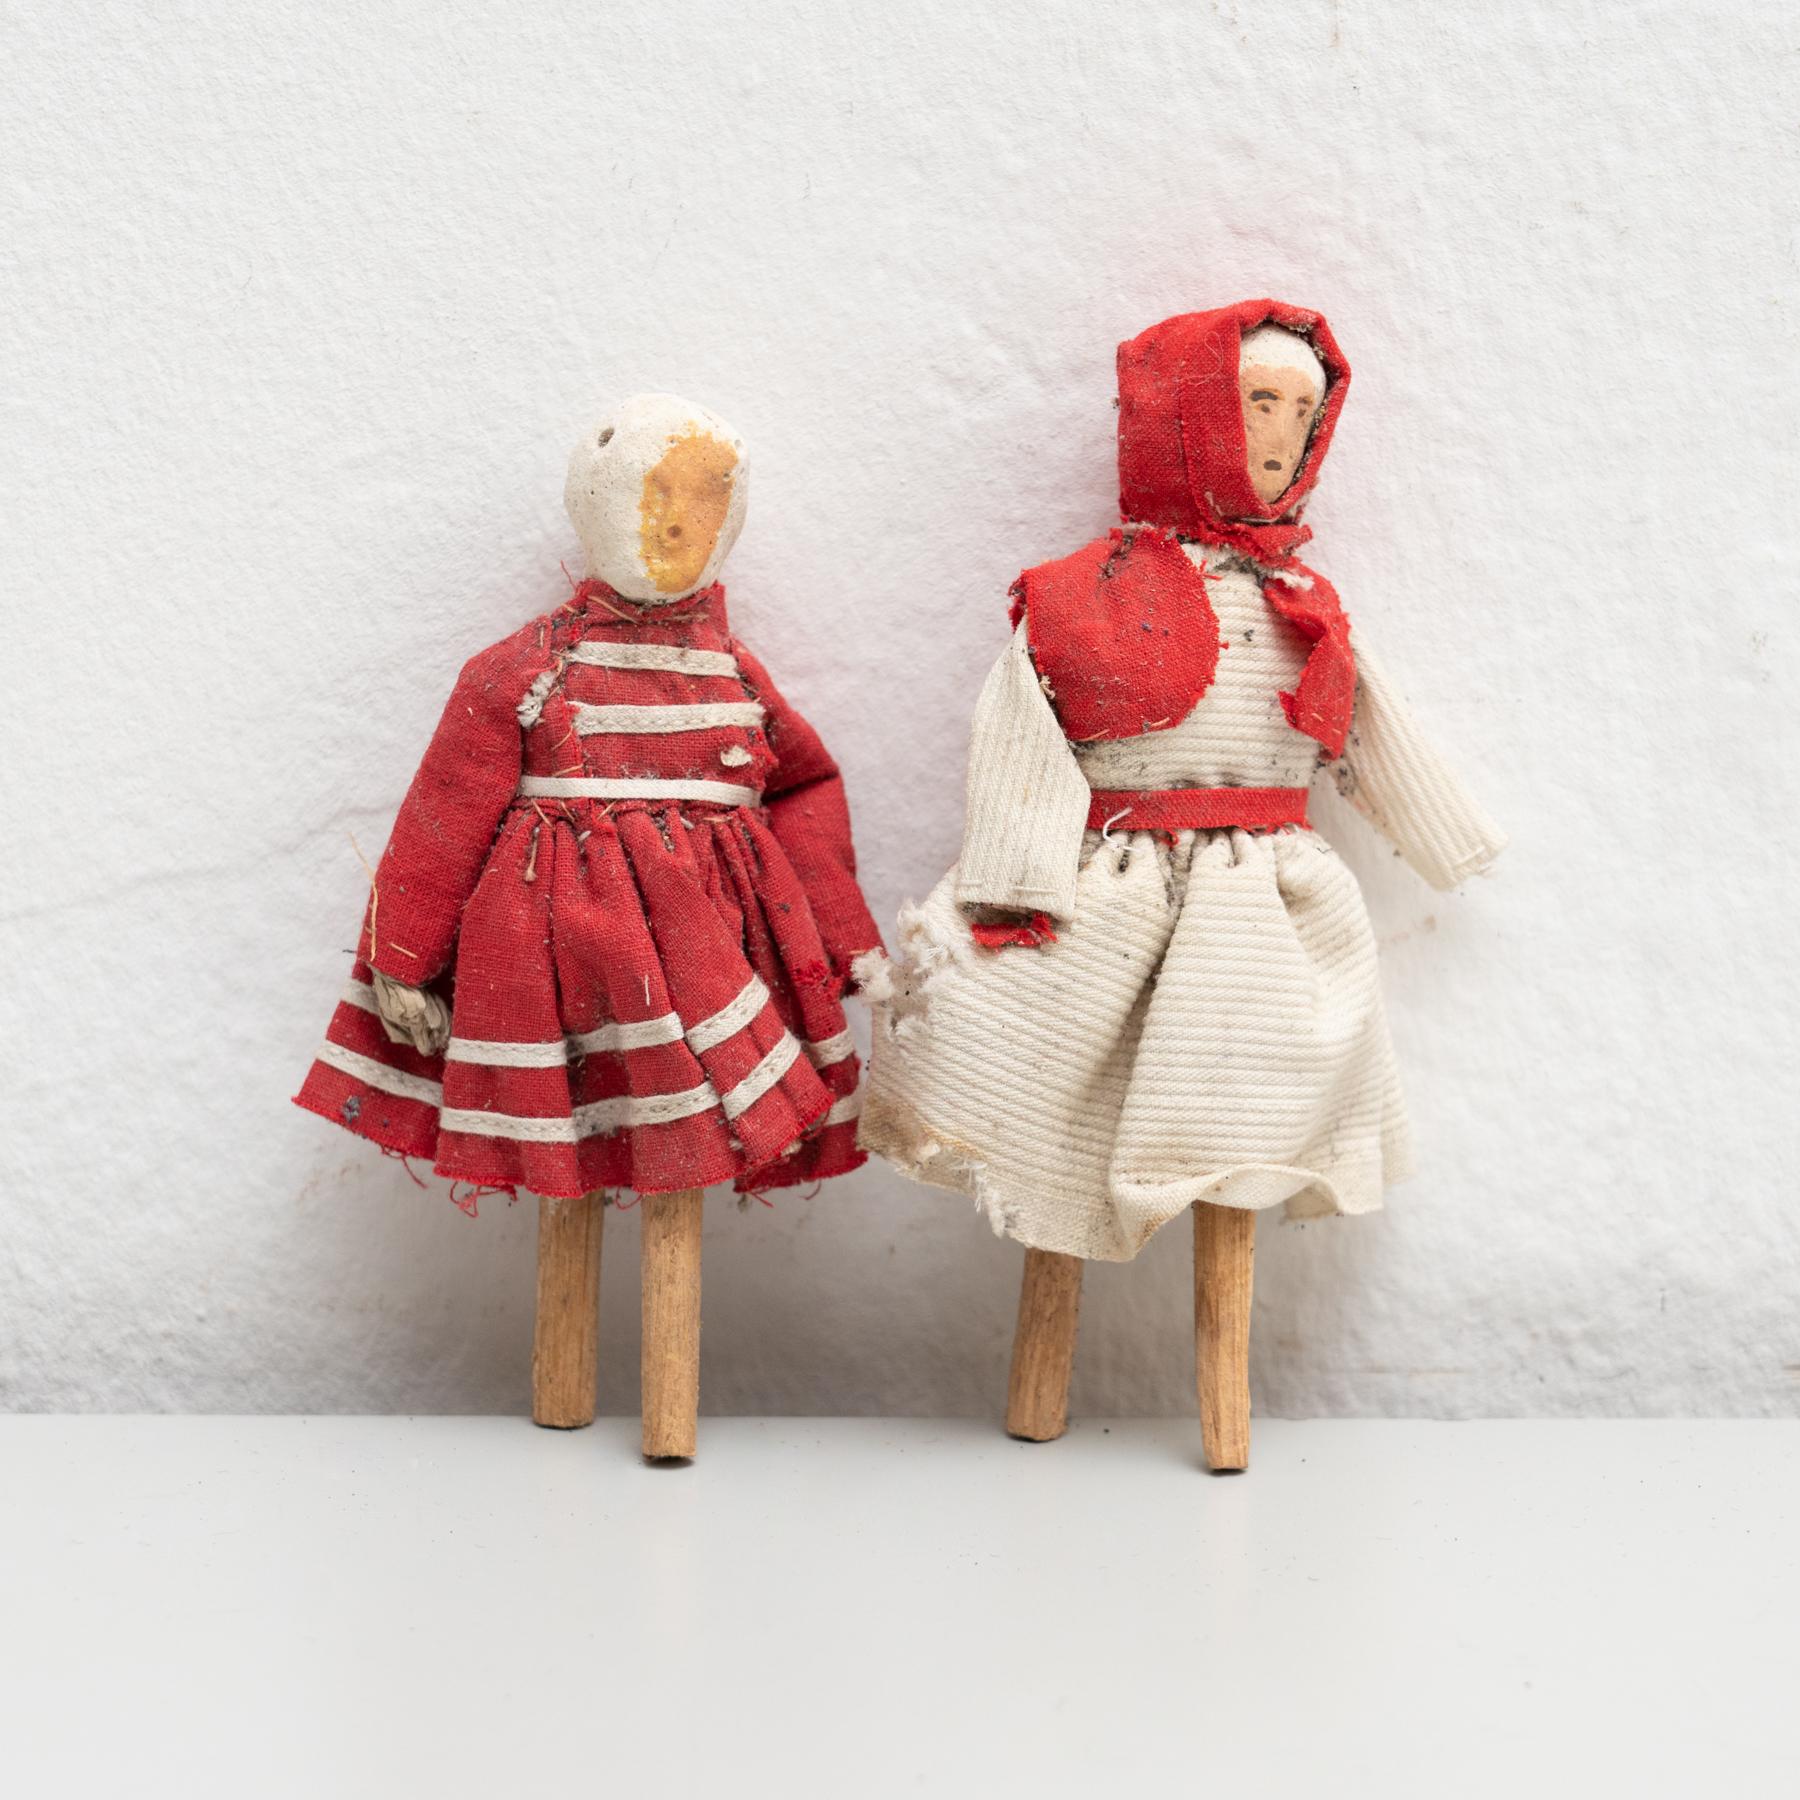 Antique early 20th century pair of hand painted rag dolls of two women. 

Manufactured circa 1920 in Spain.

In original condition, with minor wear consistent with age and use, preserving a beautiful